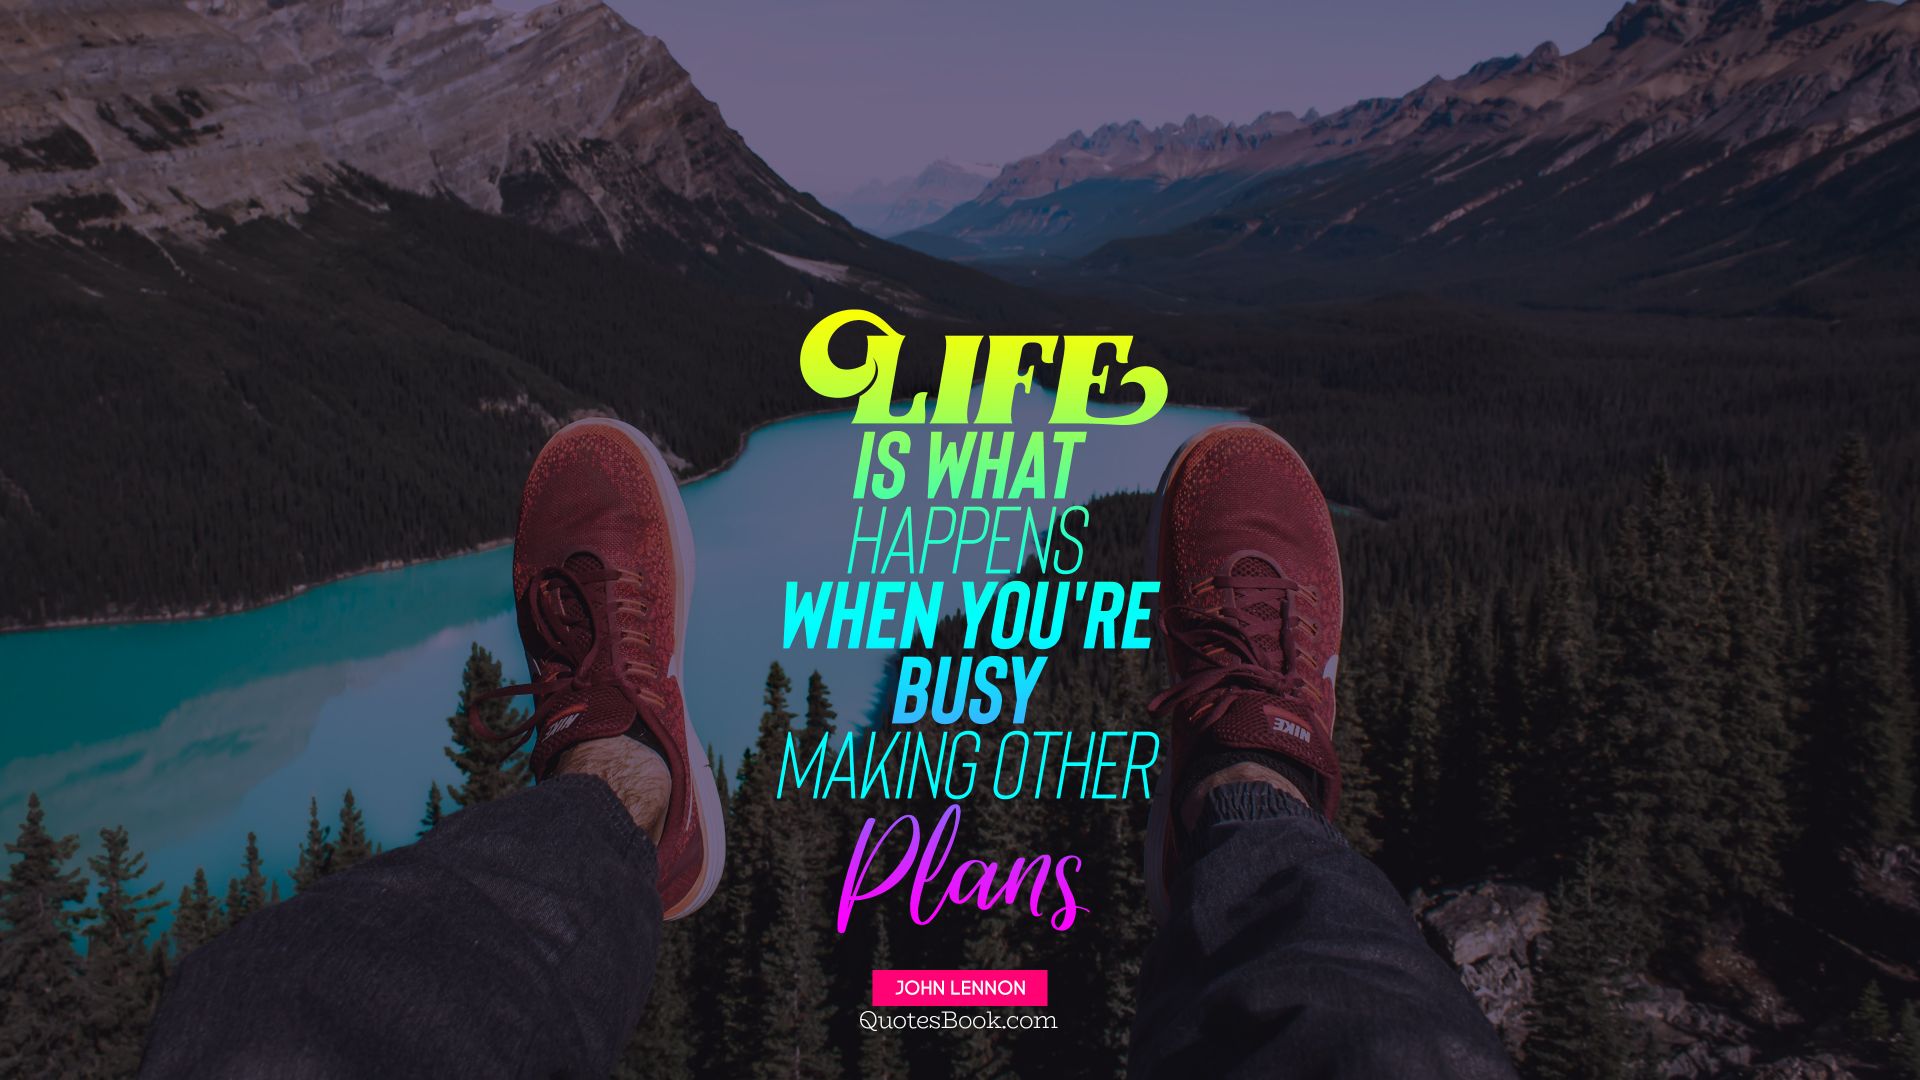 Life is what happens when you're busy making other plans. - Quote by John Lennon